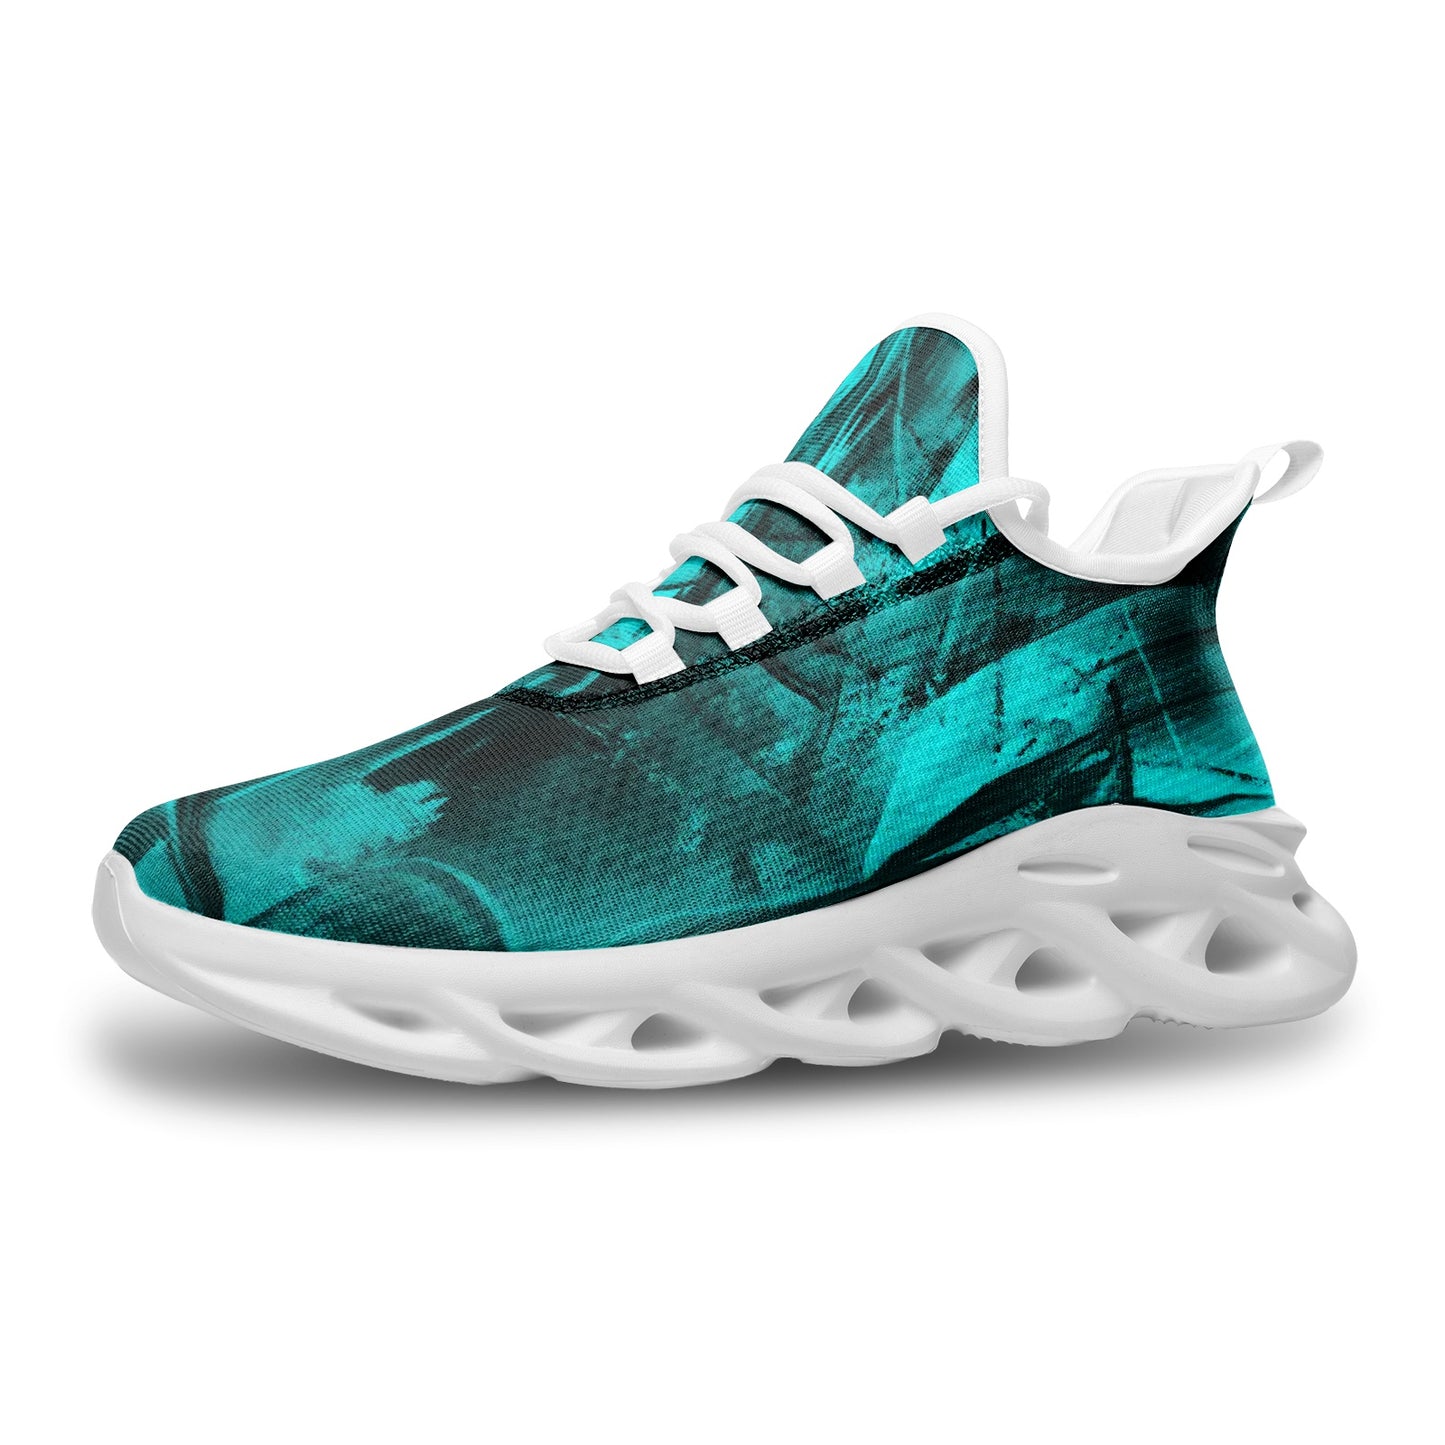 "Electricblue" unisex sneakers